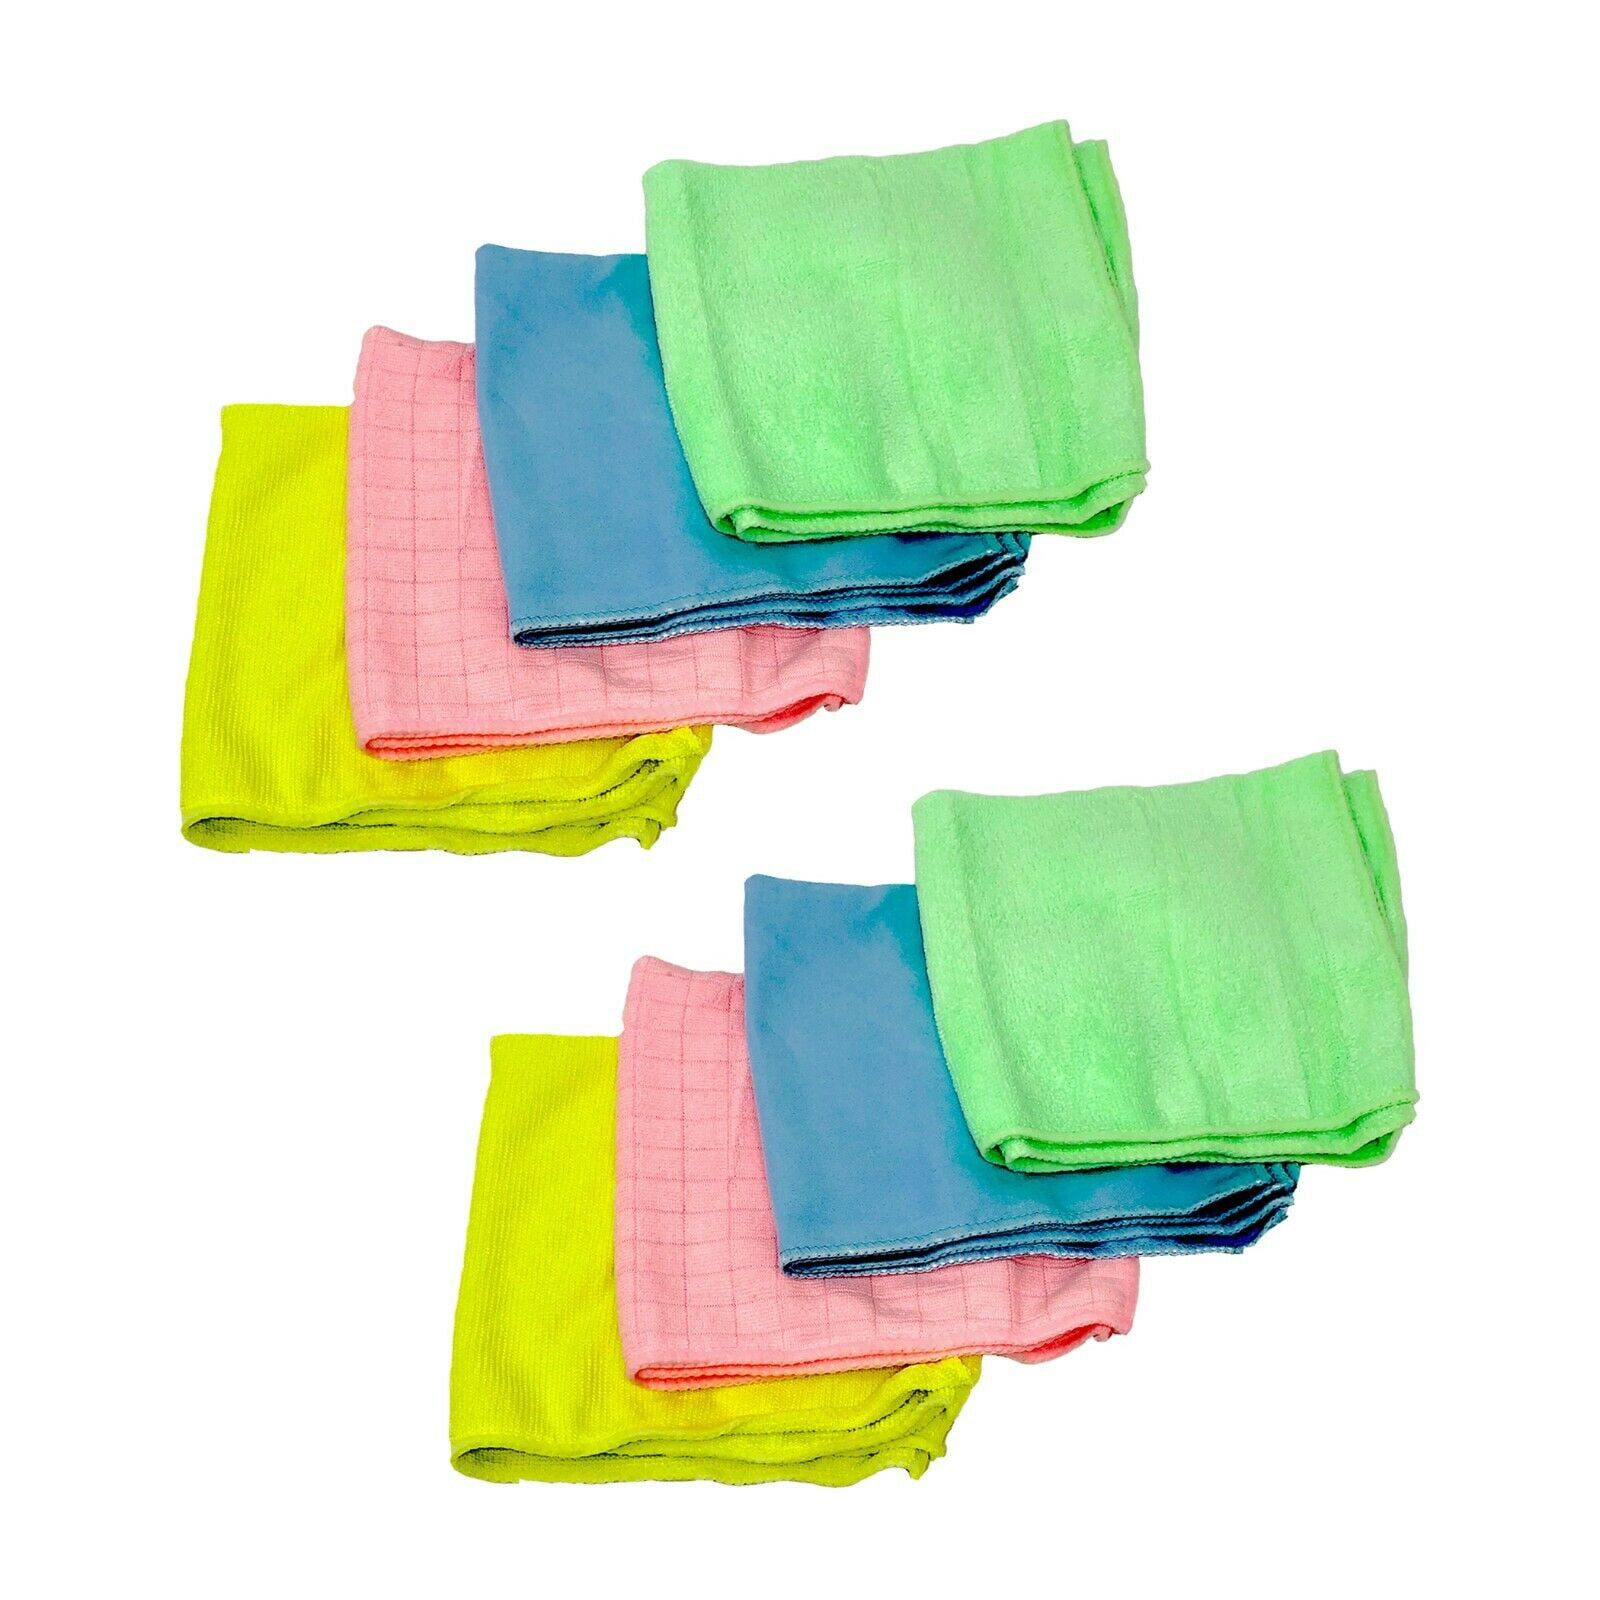 2 Pack 14x16” Microfiber Cleaning Towel Detailing Cloth Super Absorbent Reuse 